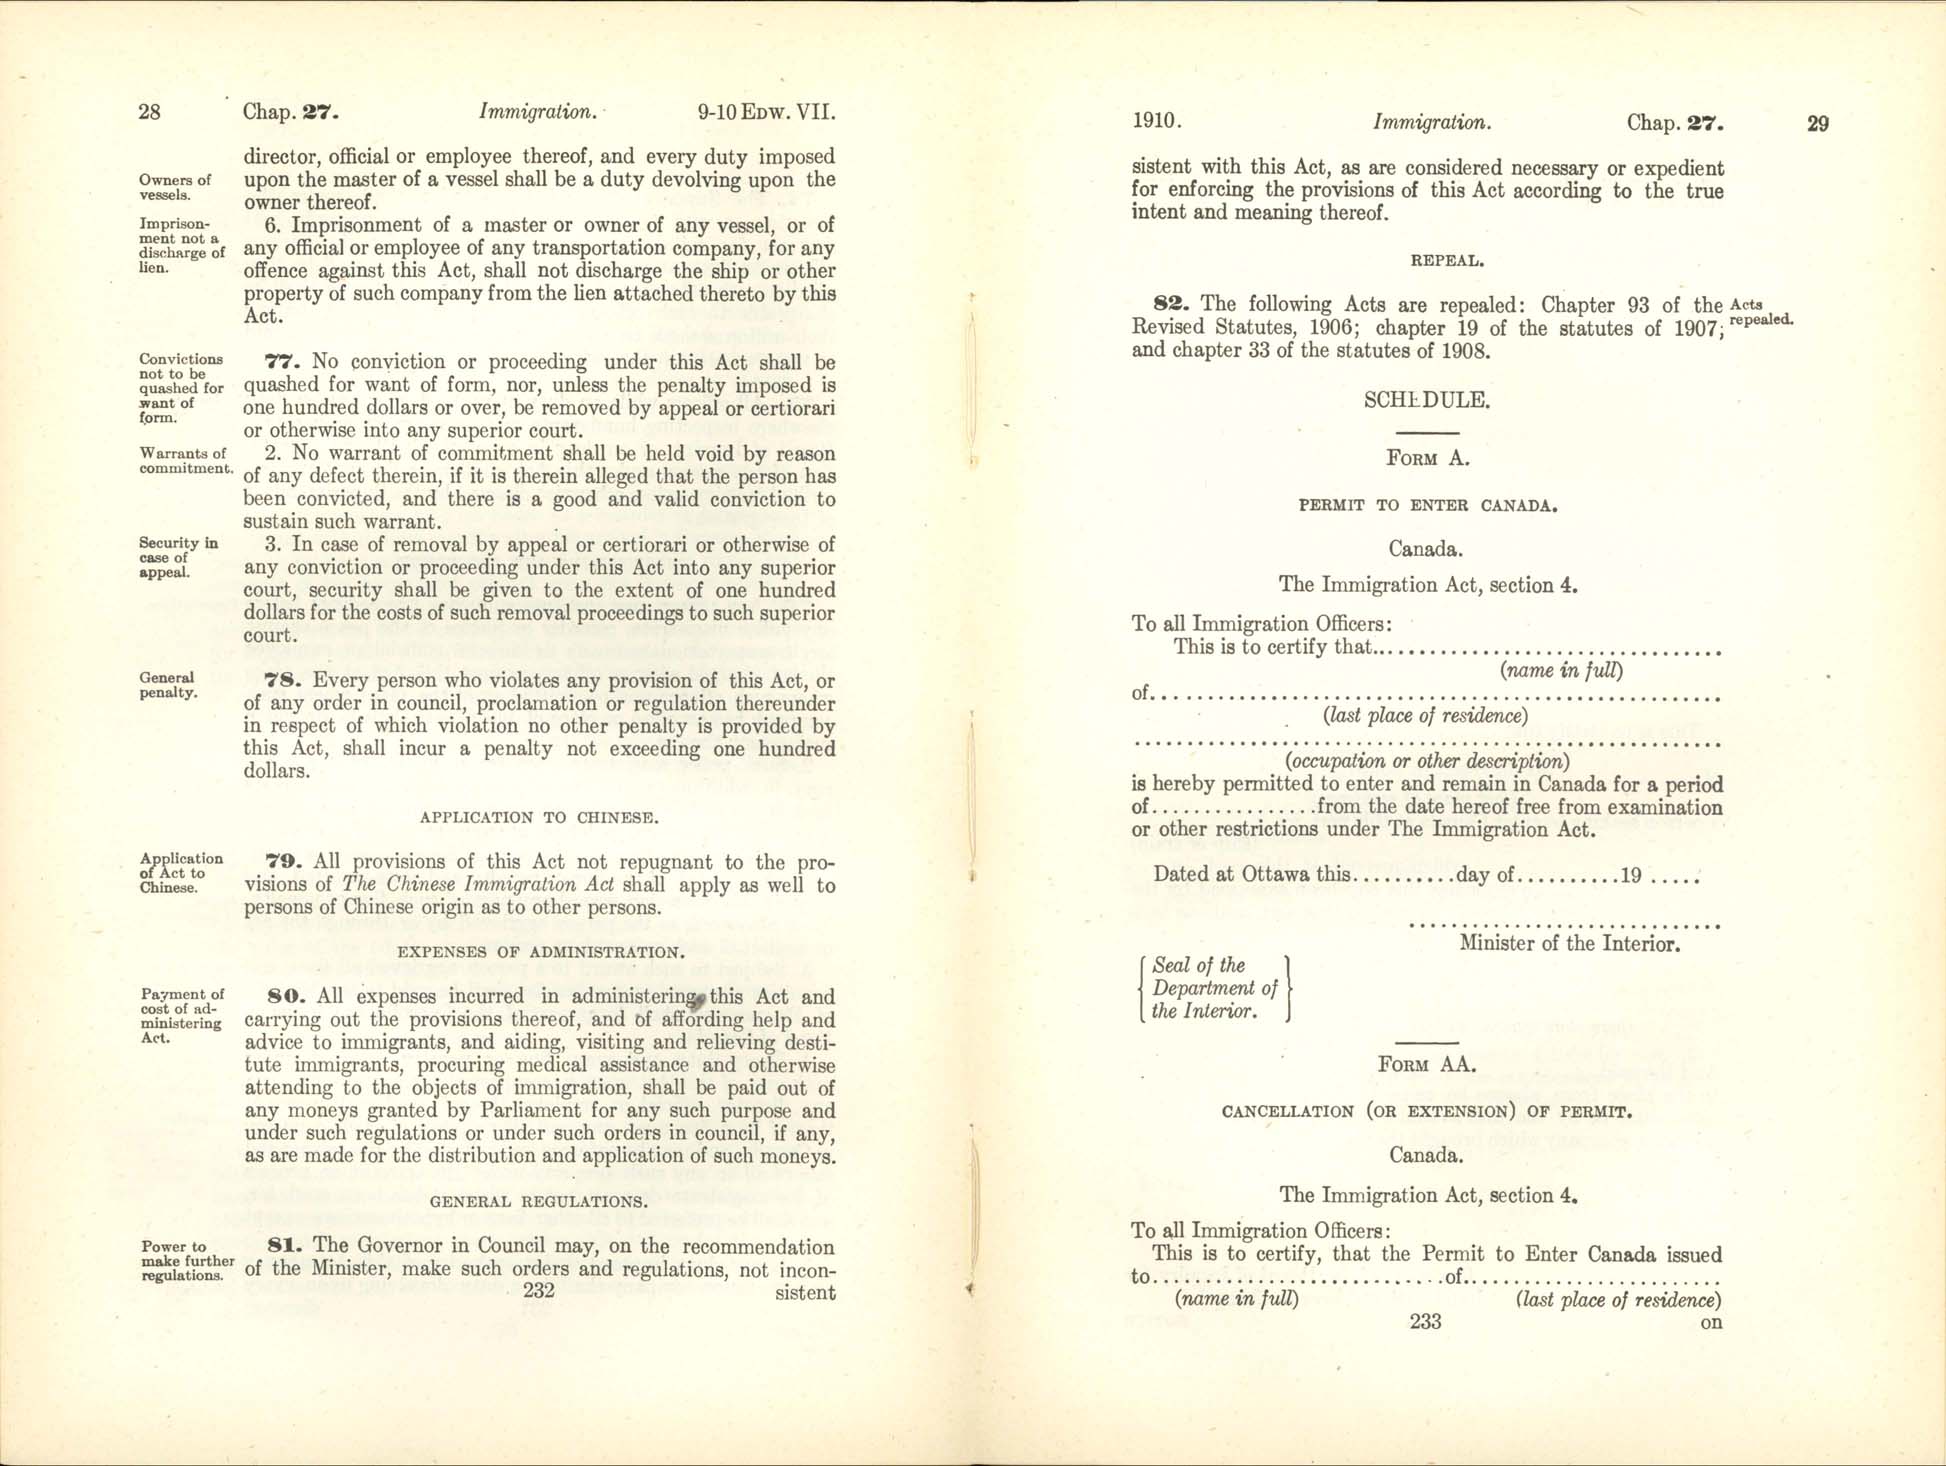 Chap. 27 Page 232, 233 Immigration Act, 1910